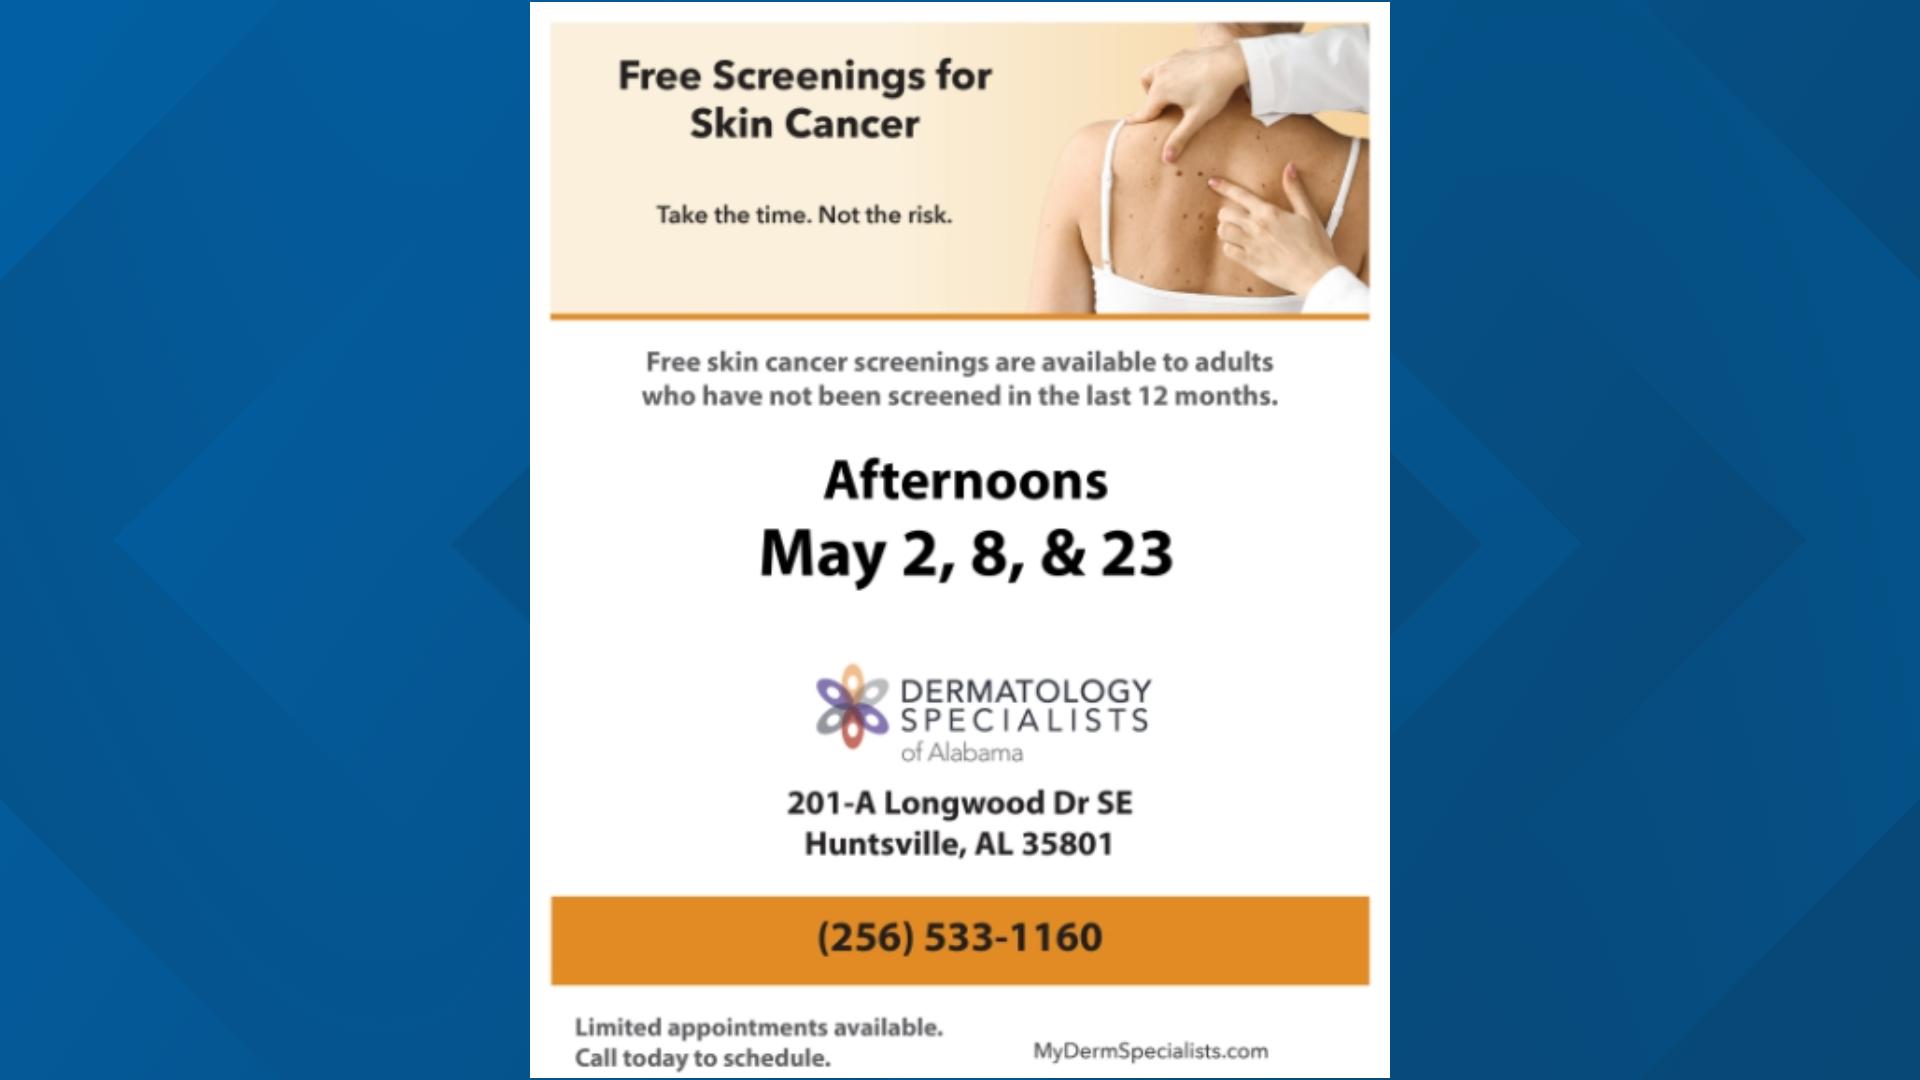 Find out how and why you should get regular skin cancer screenings.